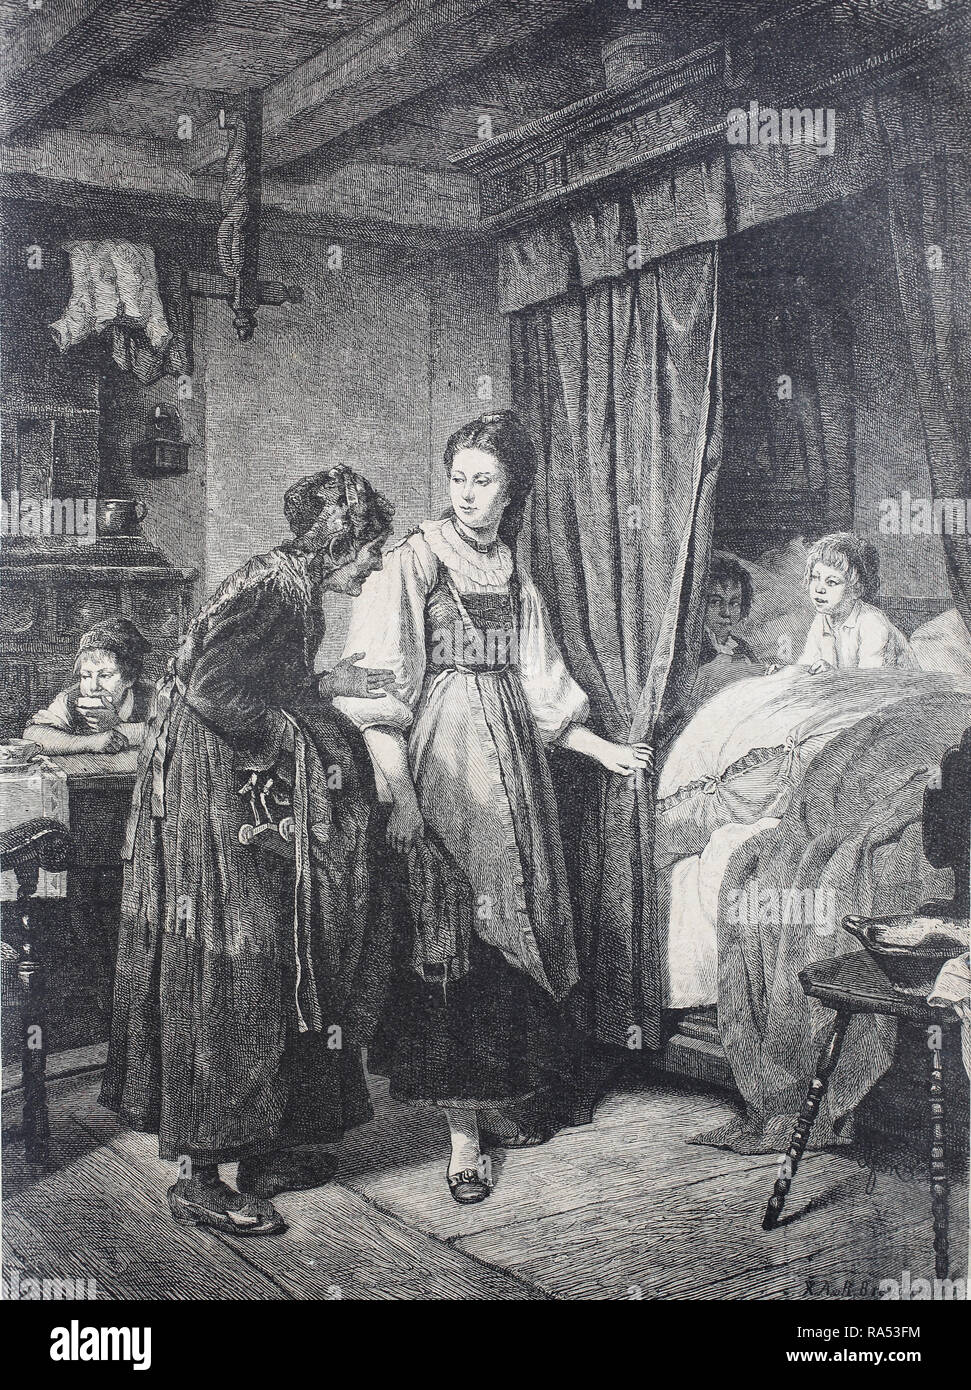 Digital improved reproduction, the godmother is visiting the godchild, godchildren, Besuch der Patin bei den Patenkindern, from an original print from the year 1865, 19th century, Stock Photo